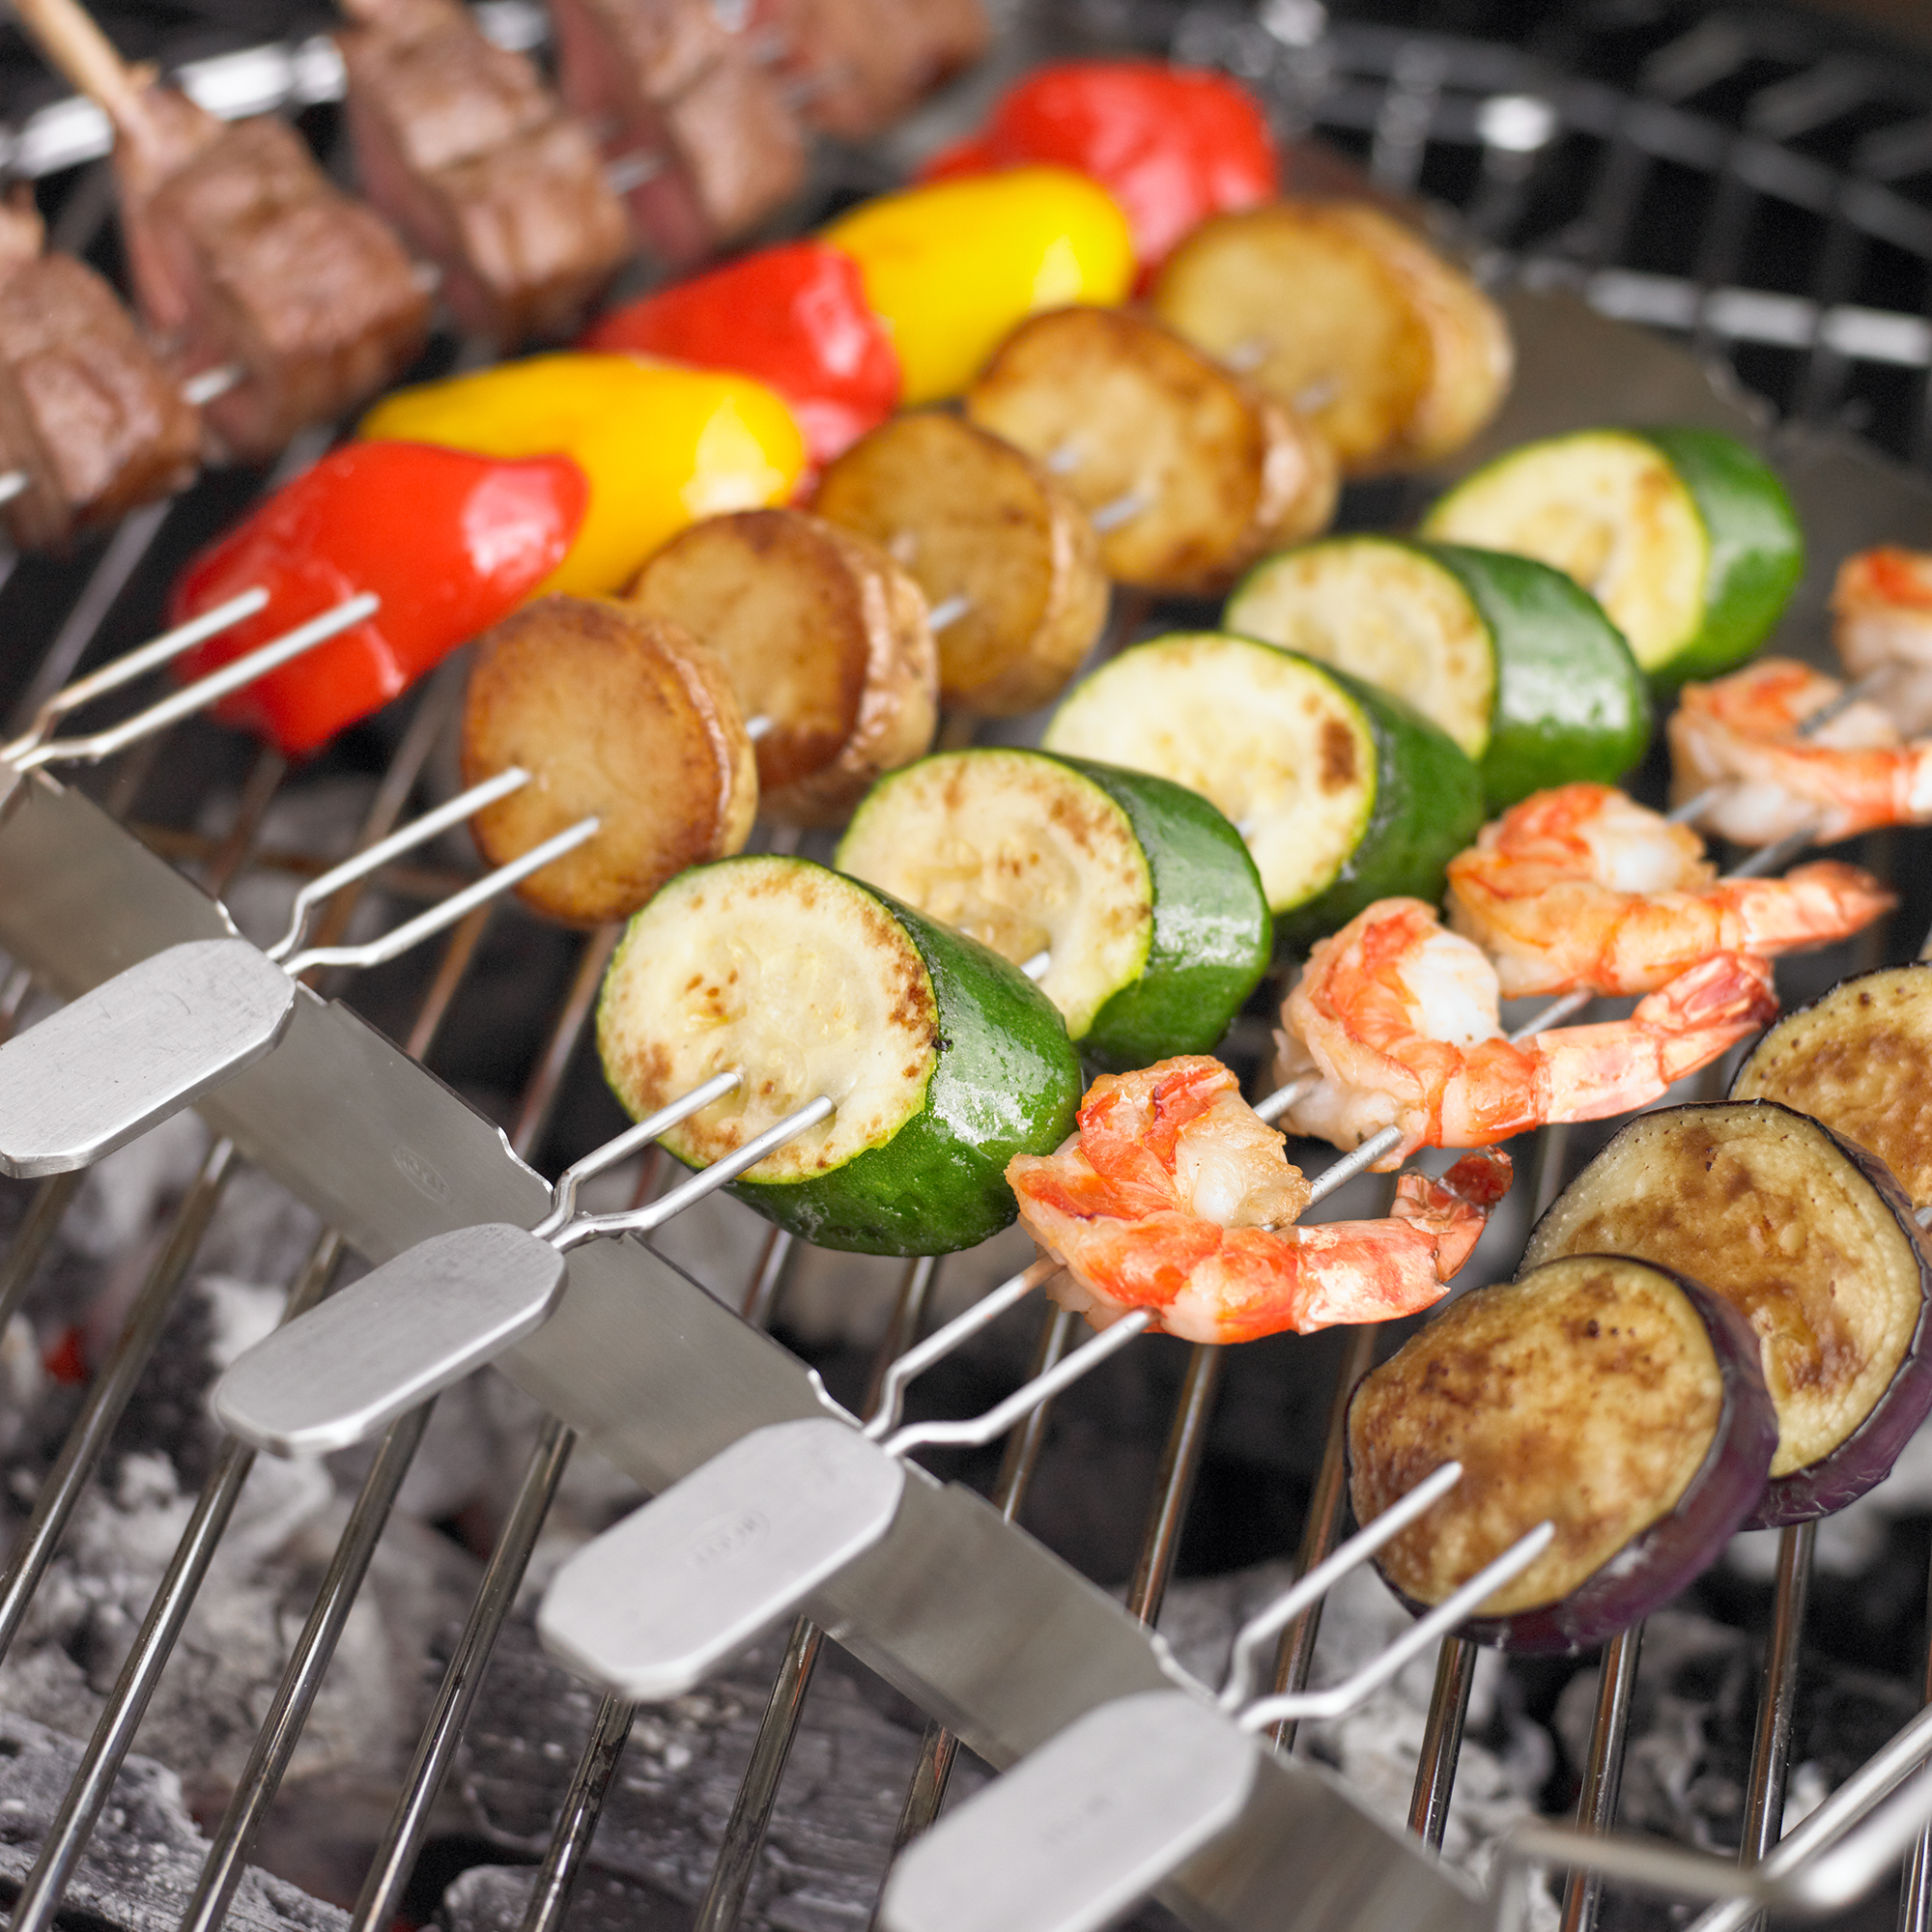 Grill Skewers 4 pcs.